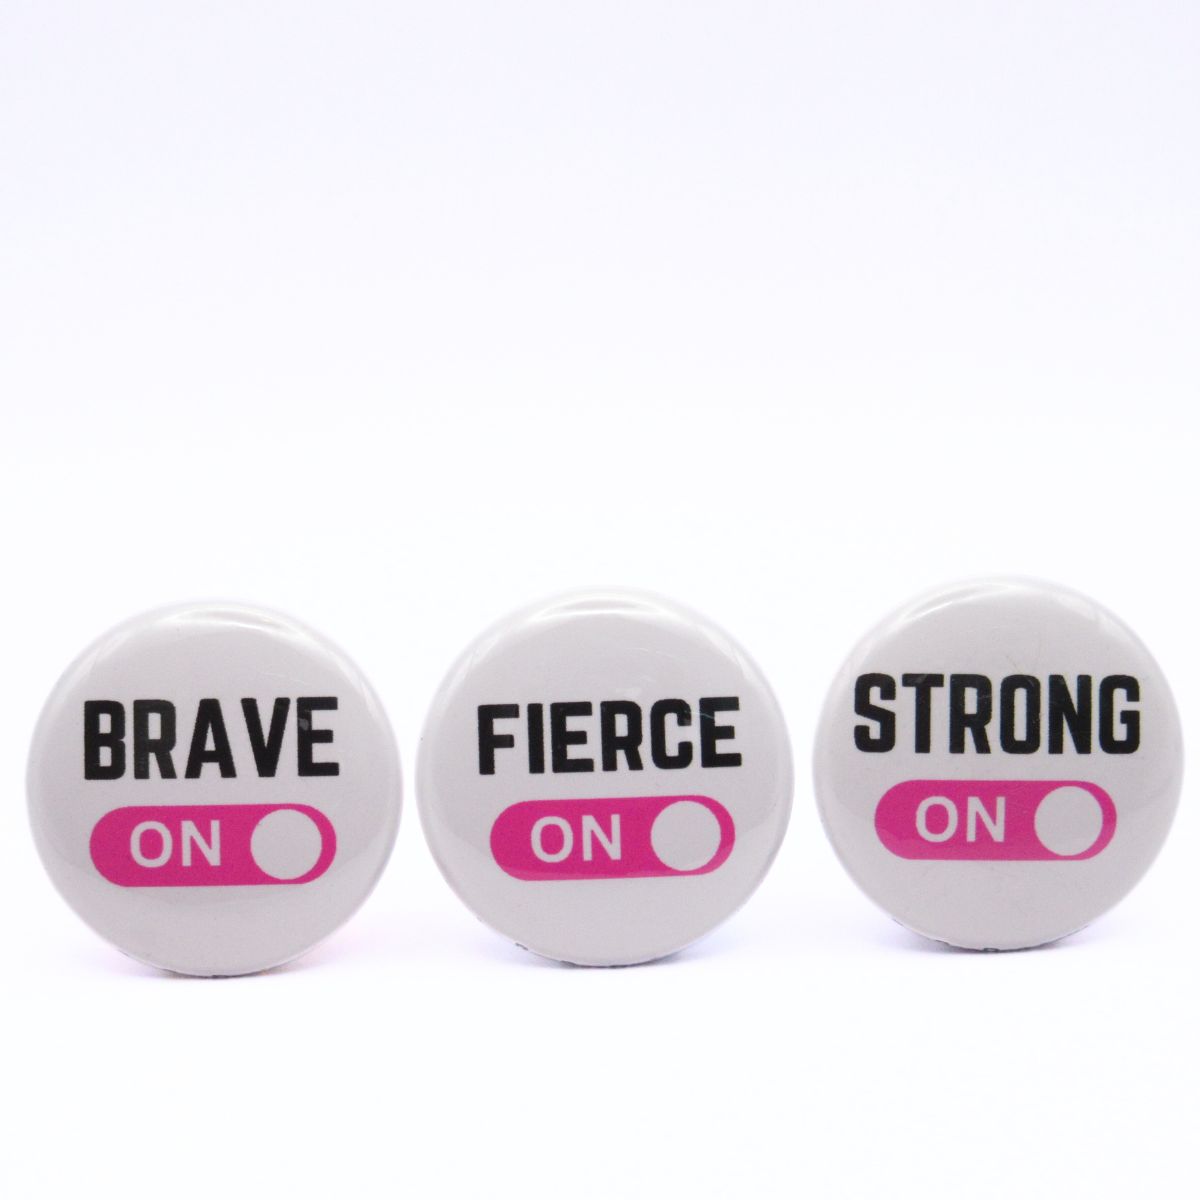 BooBooRoo Pinback Button (i.e. button, badge, pin) 3-pack displaying brave, fierce, and strong modes are on. Pink background for mode indicator.